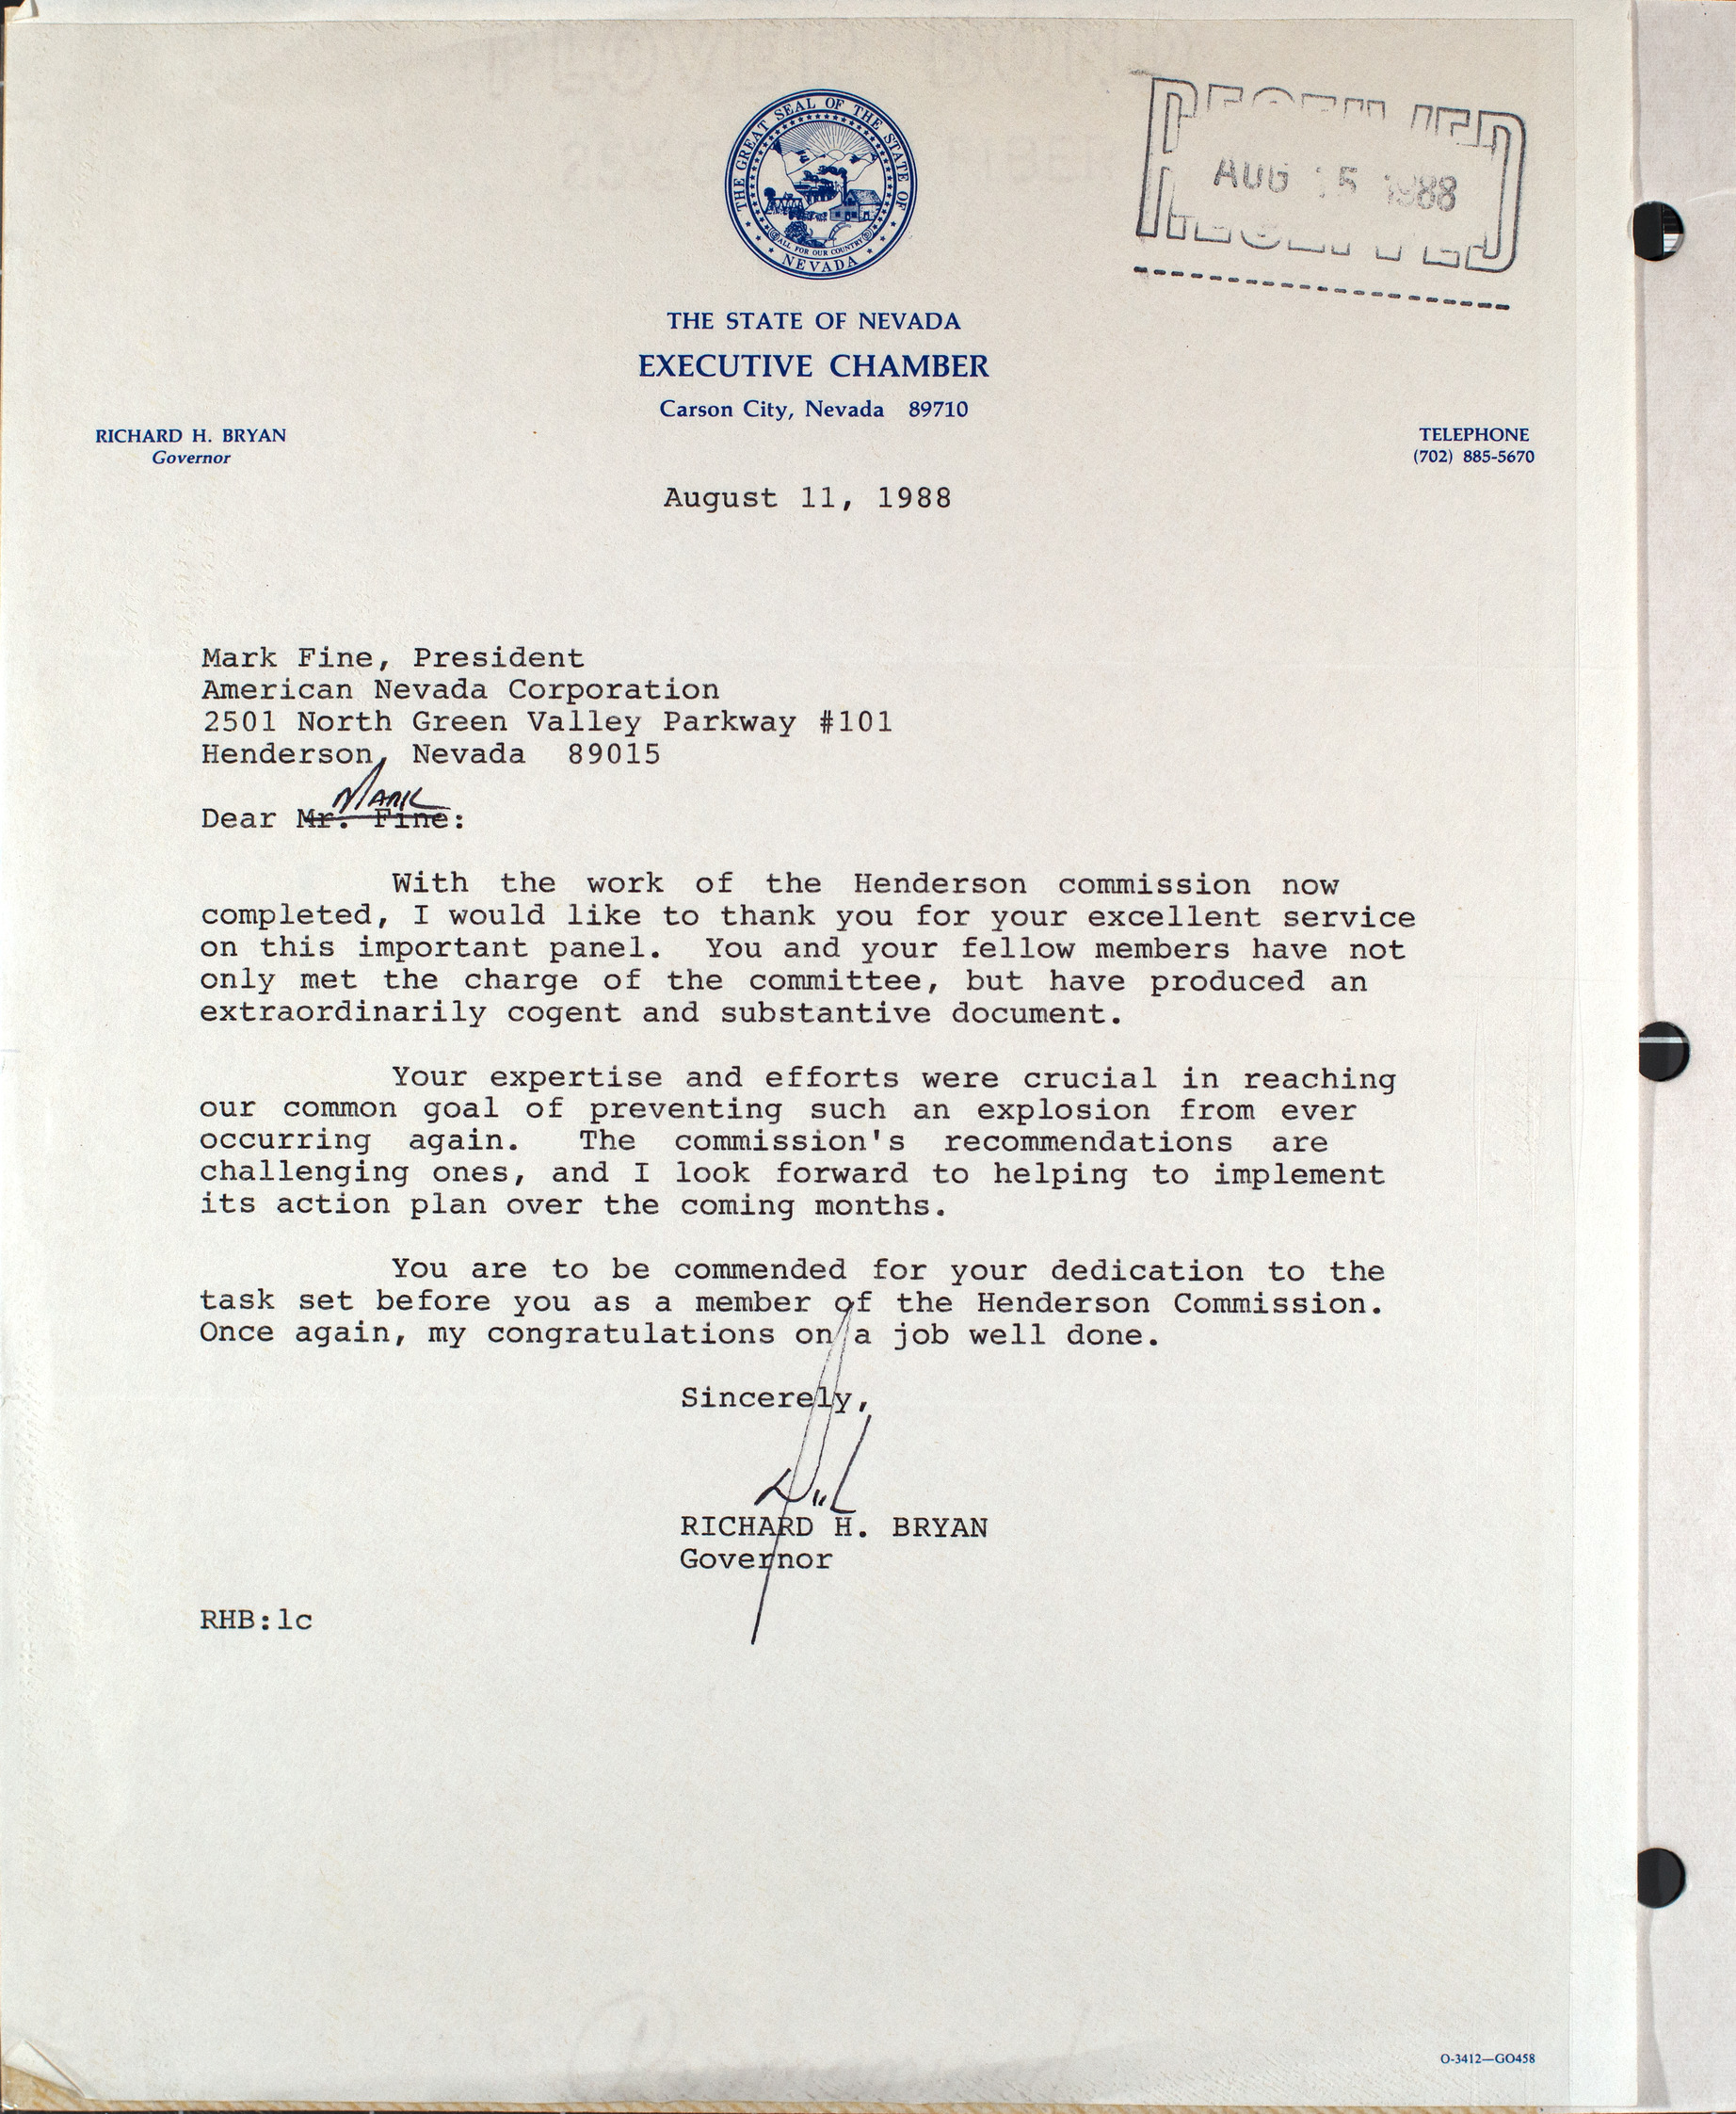 Letter from Richard Bryan to Mark Fine, August 11, 1988